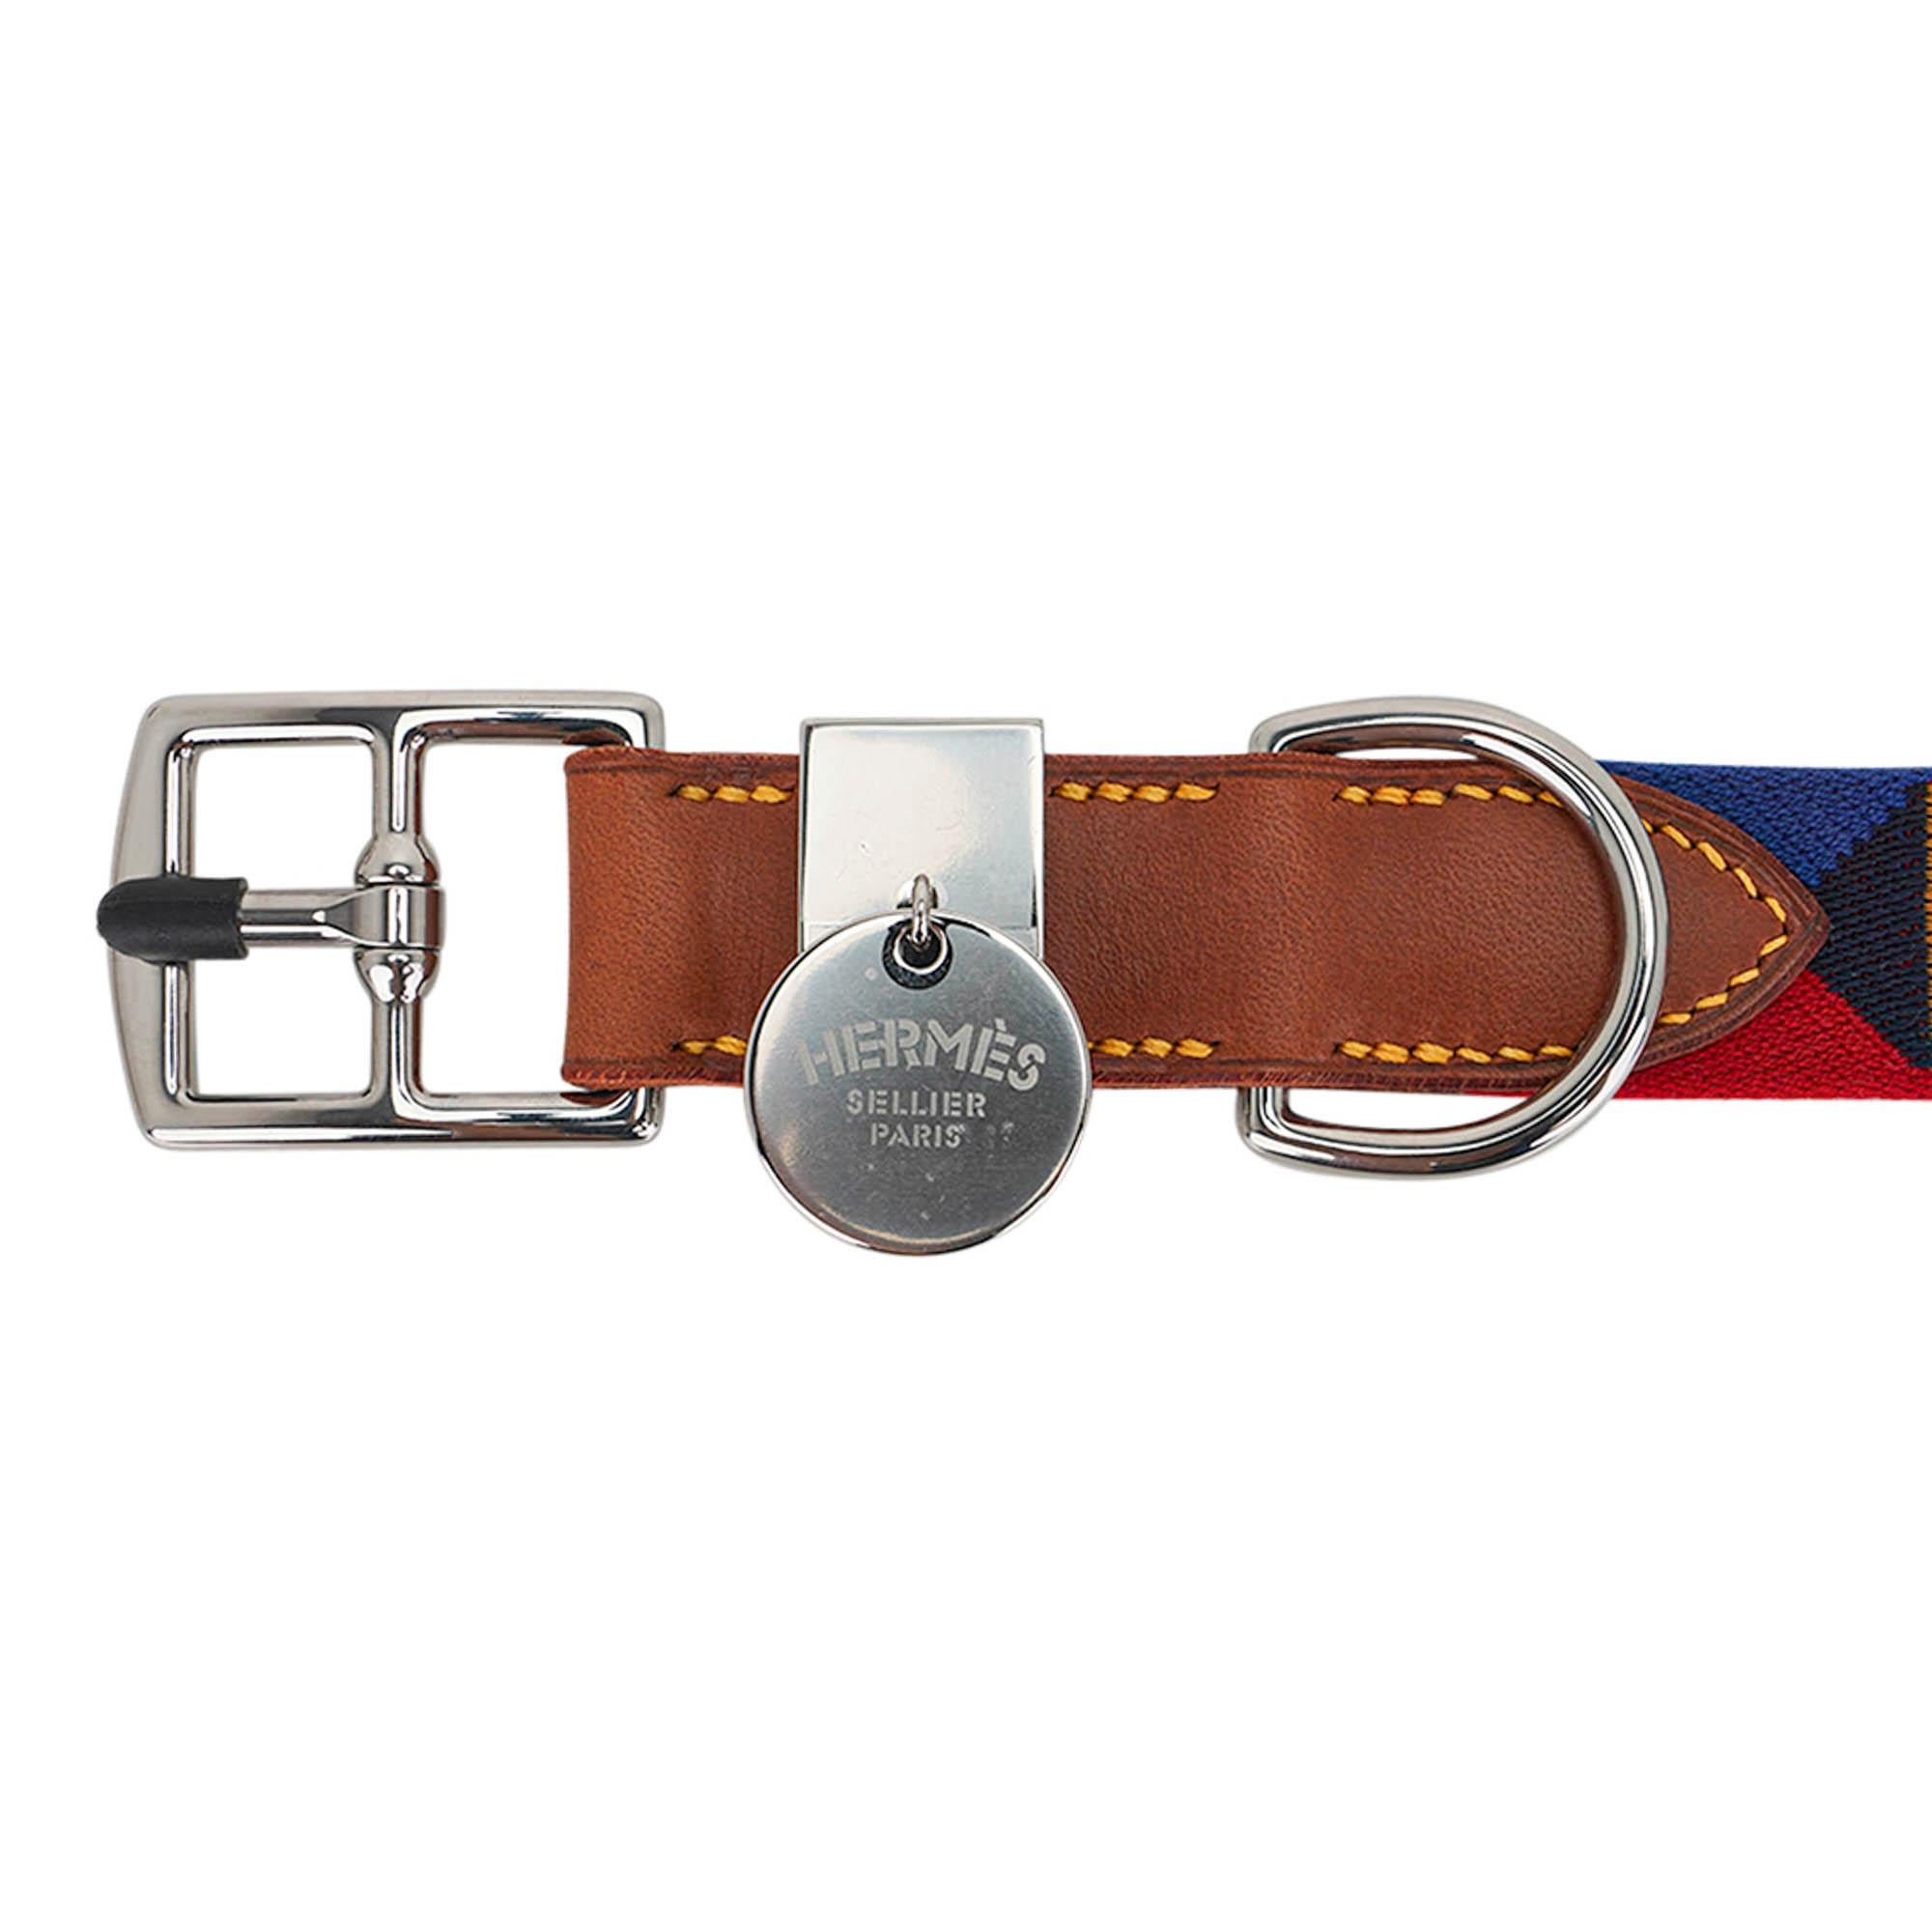 Hermes Medor Paille II Dog Collar and Lead Set featured in the Medium size.
The collar and lead are featured in Dark Irish bridle leather and a textile interpretation of the Medor stud in red, blue, green and gold colorway.
The leather has